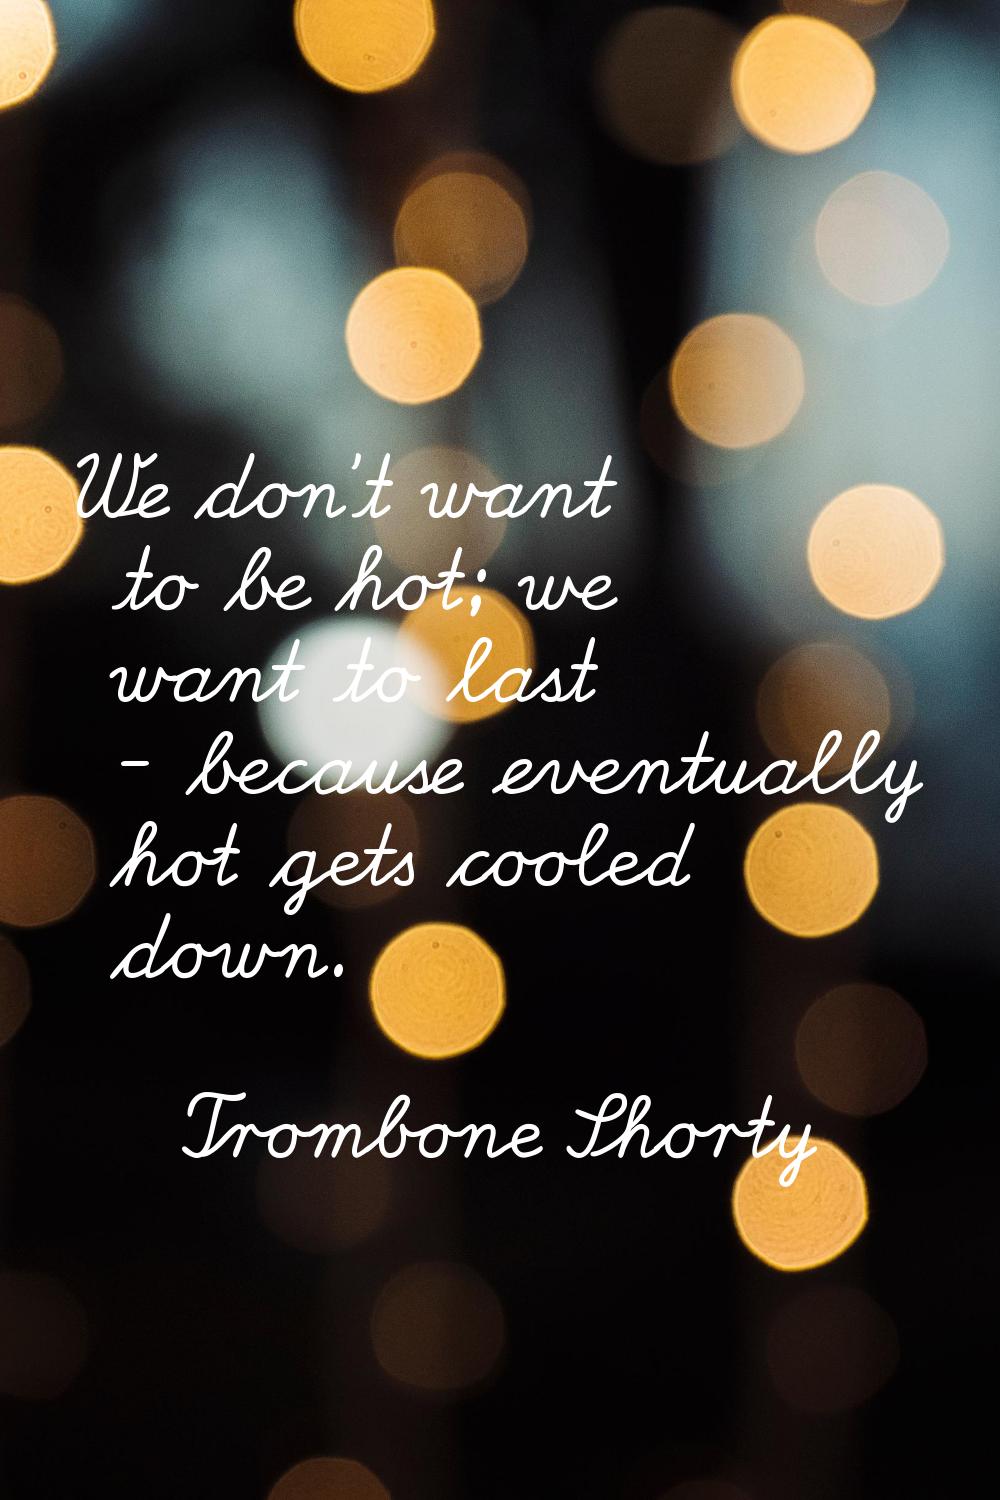 We don't want to be hot; we want to last - because eventually hot gets cooled down.